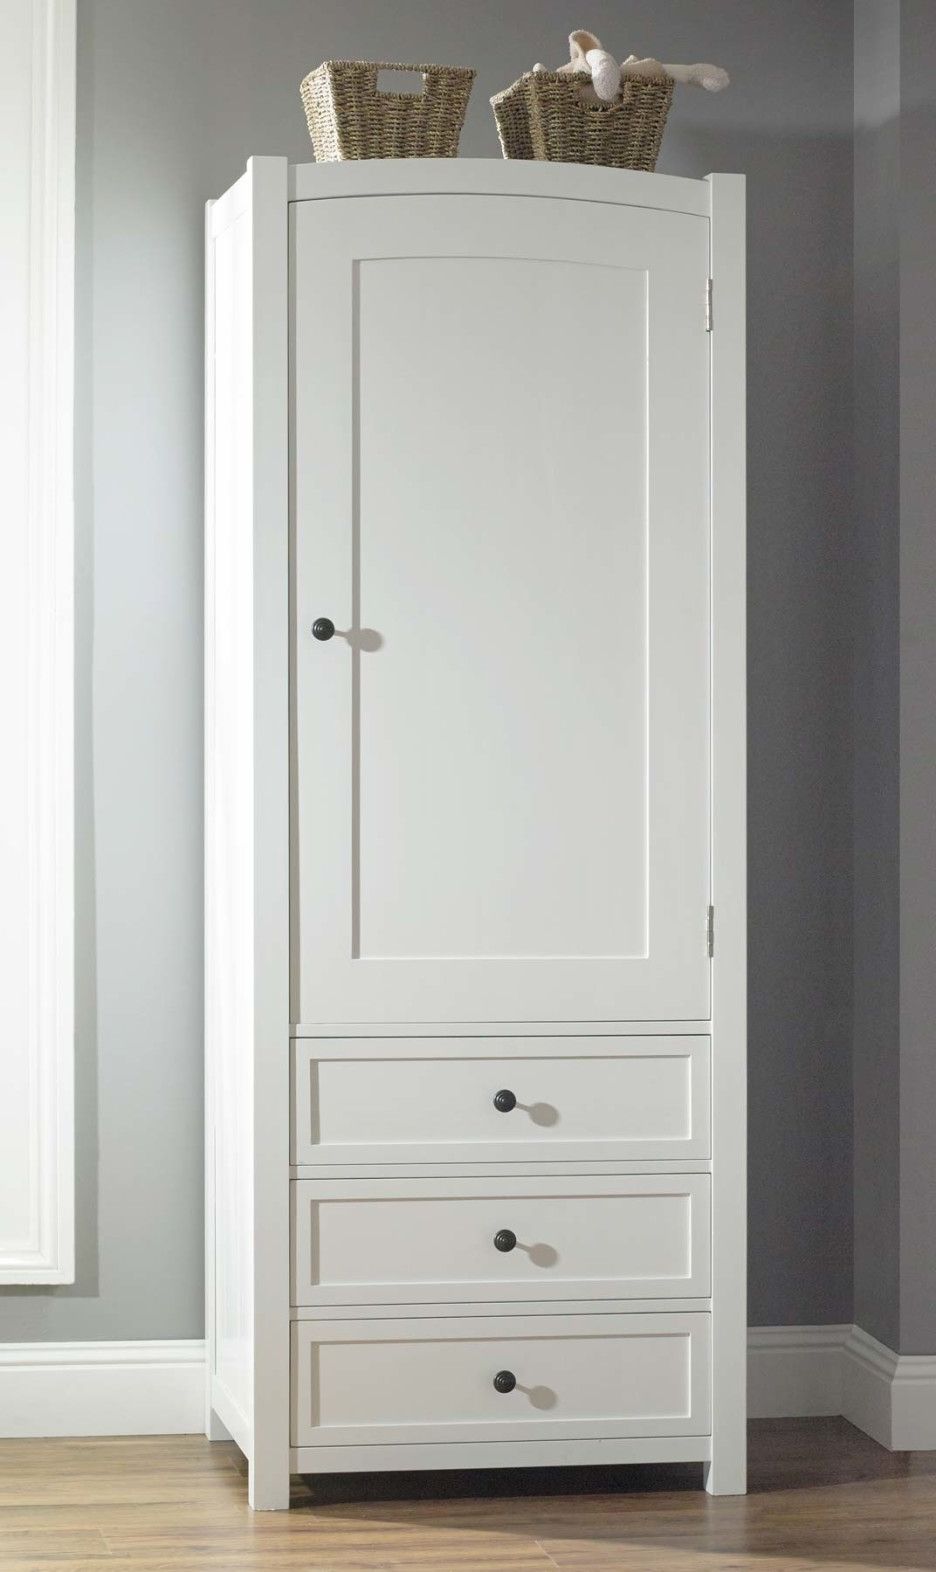 Recent Minimalist White Painted Wooden Wardrobe Cupboard With Half Wooden Throughout White Wood Wardrobes With Drawers (View 3 of 15)